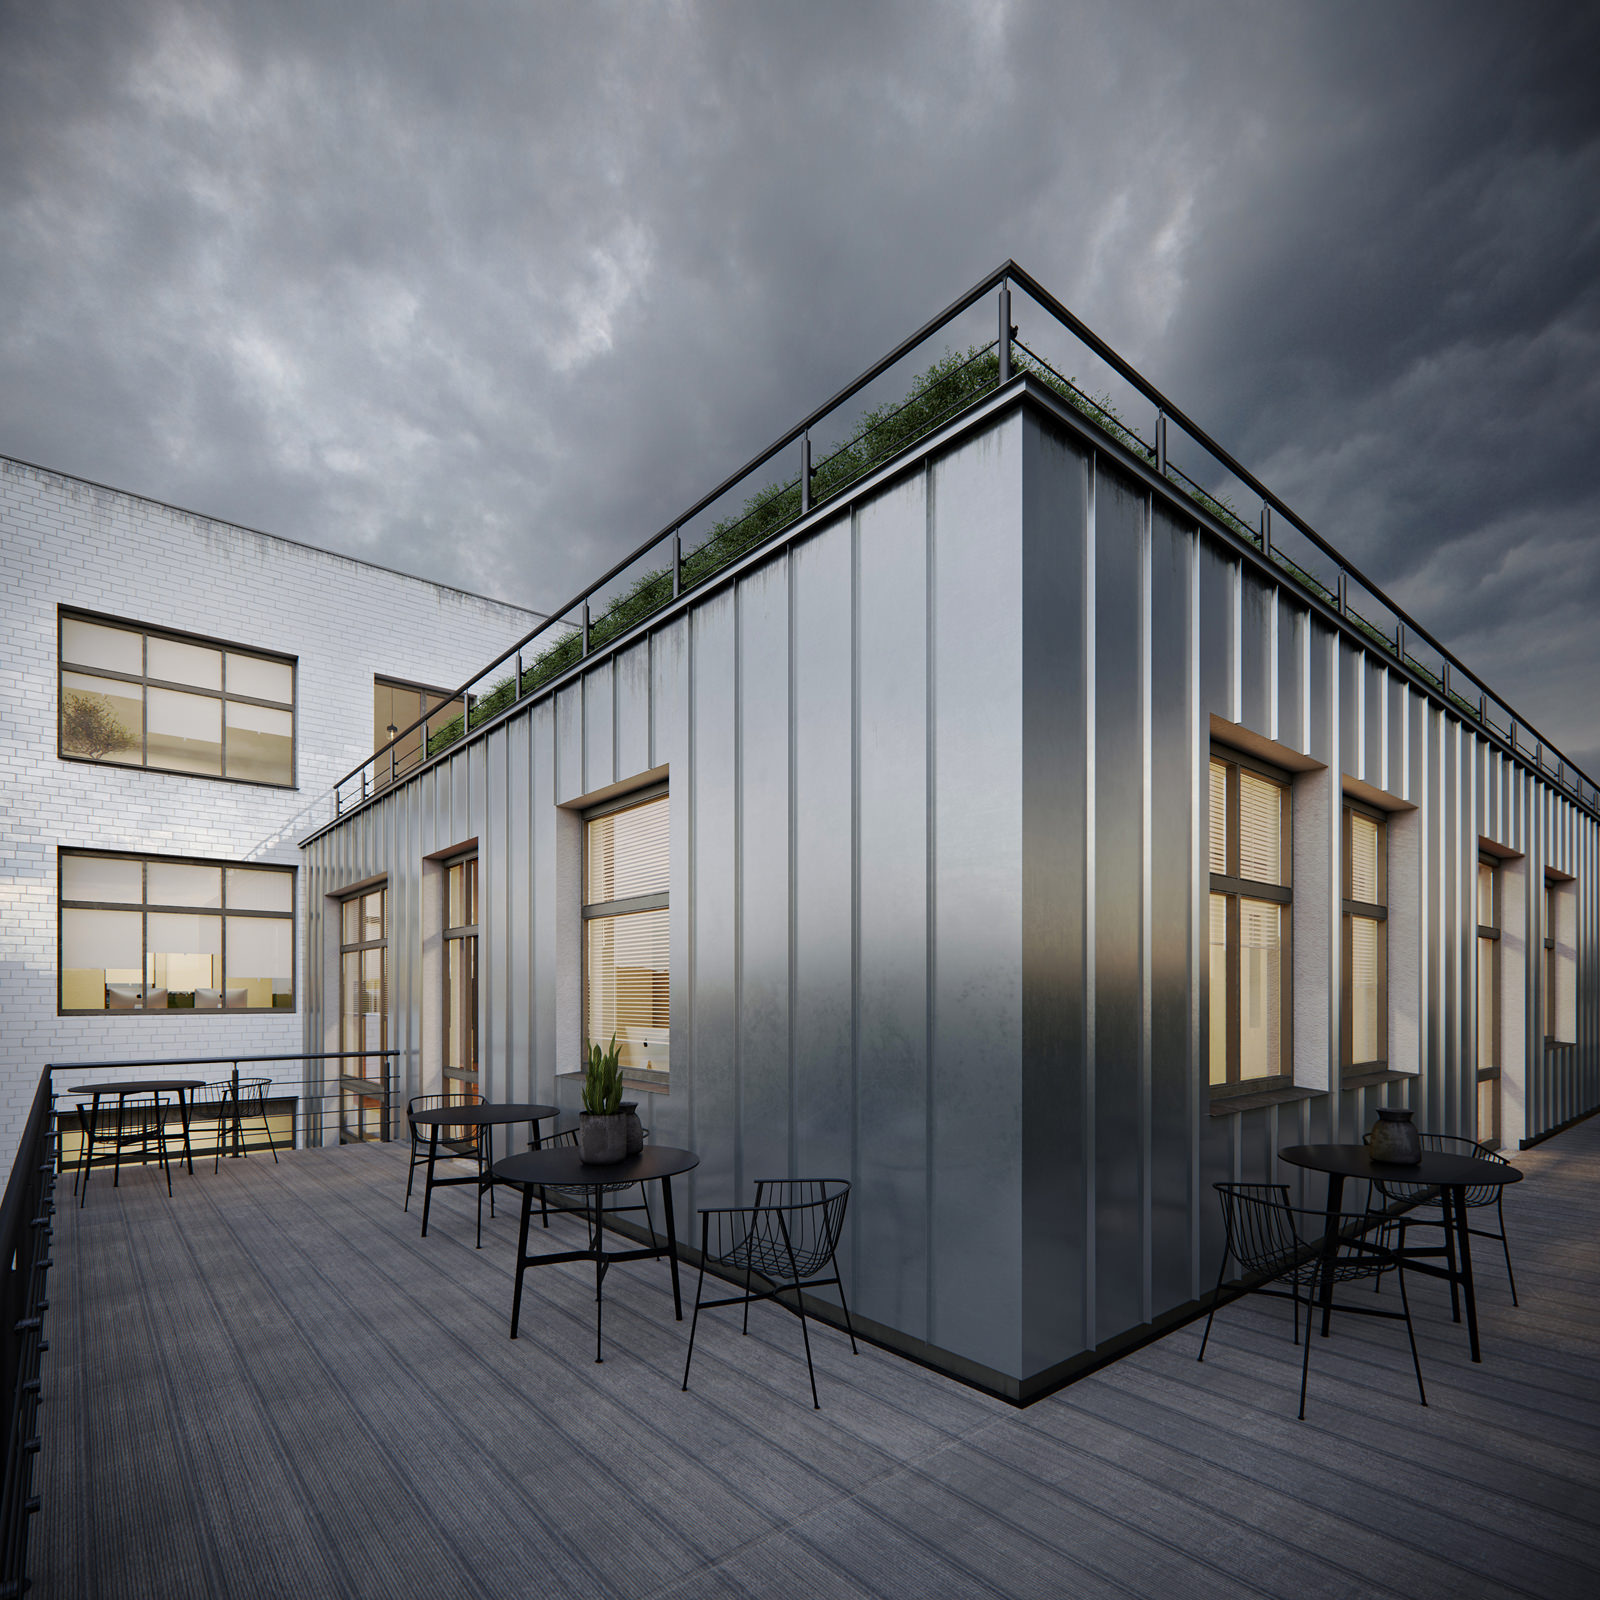 Terrace on a rooftop rendered in metallic grey color with several black steel seating areas